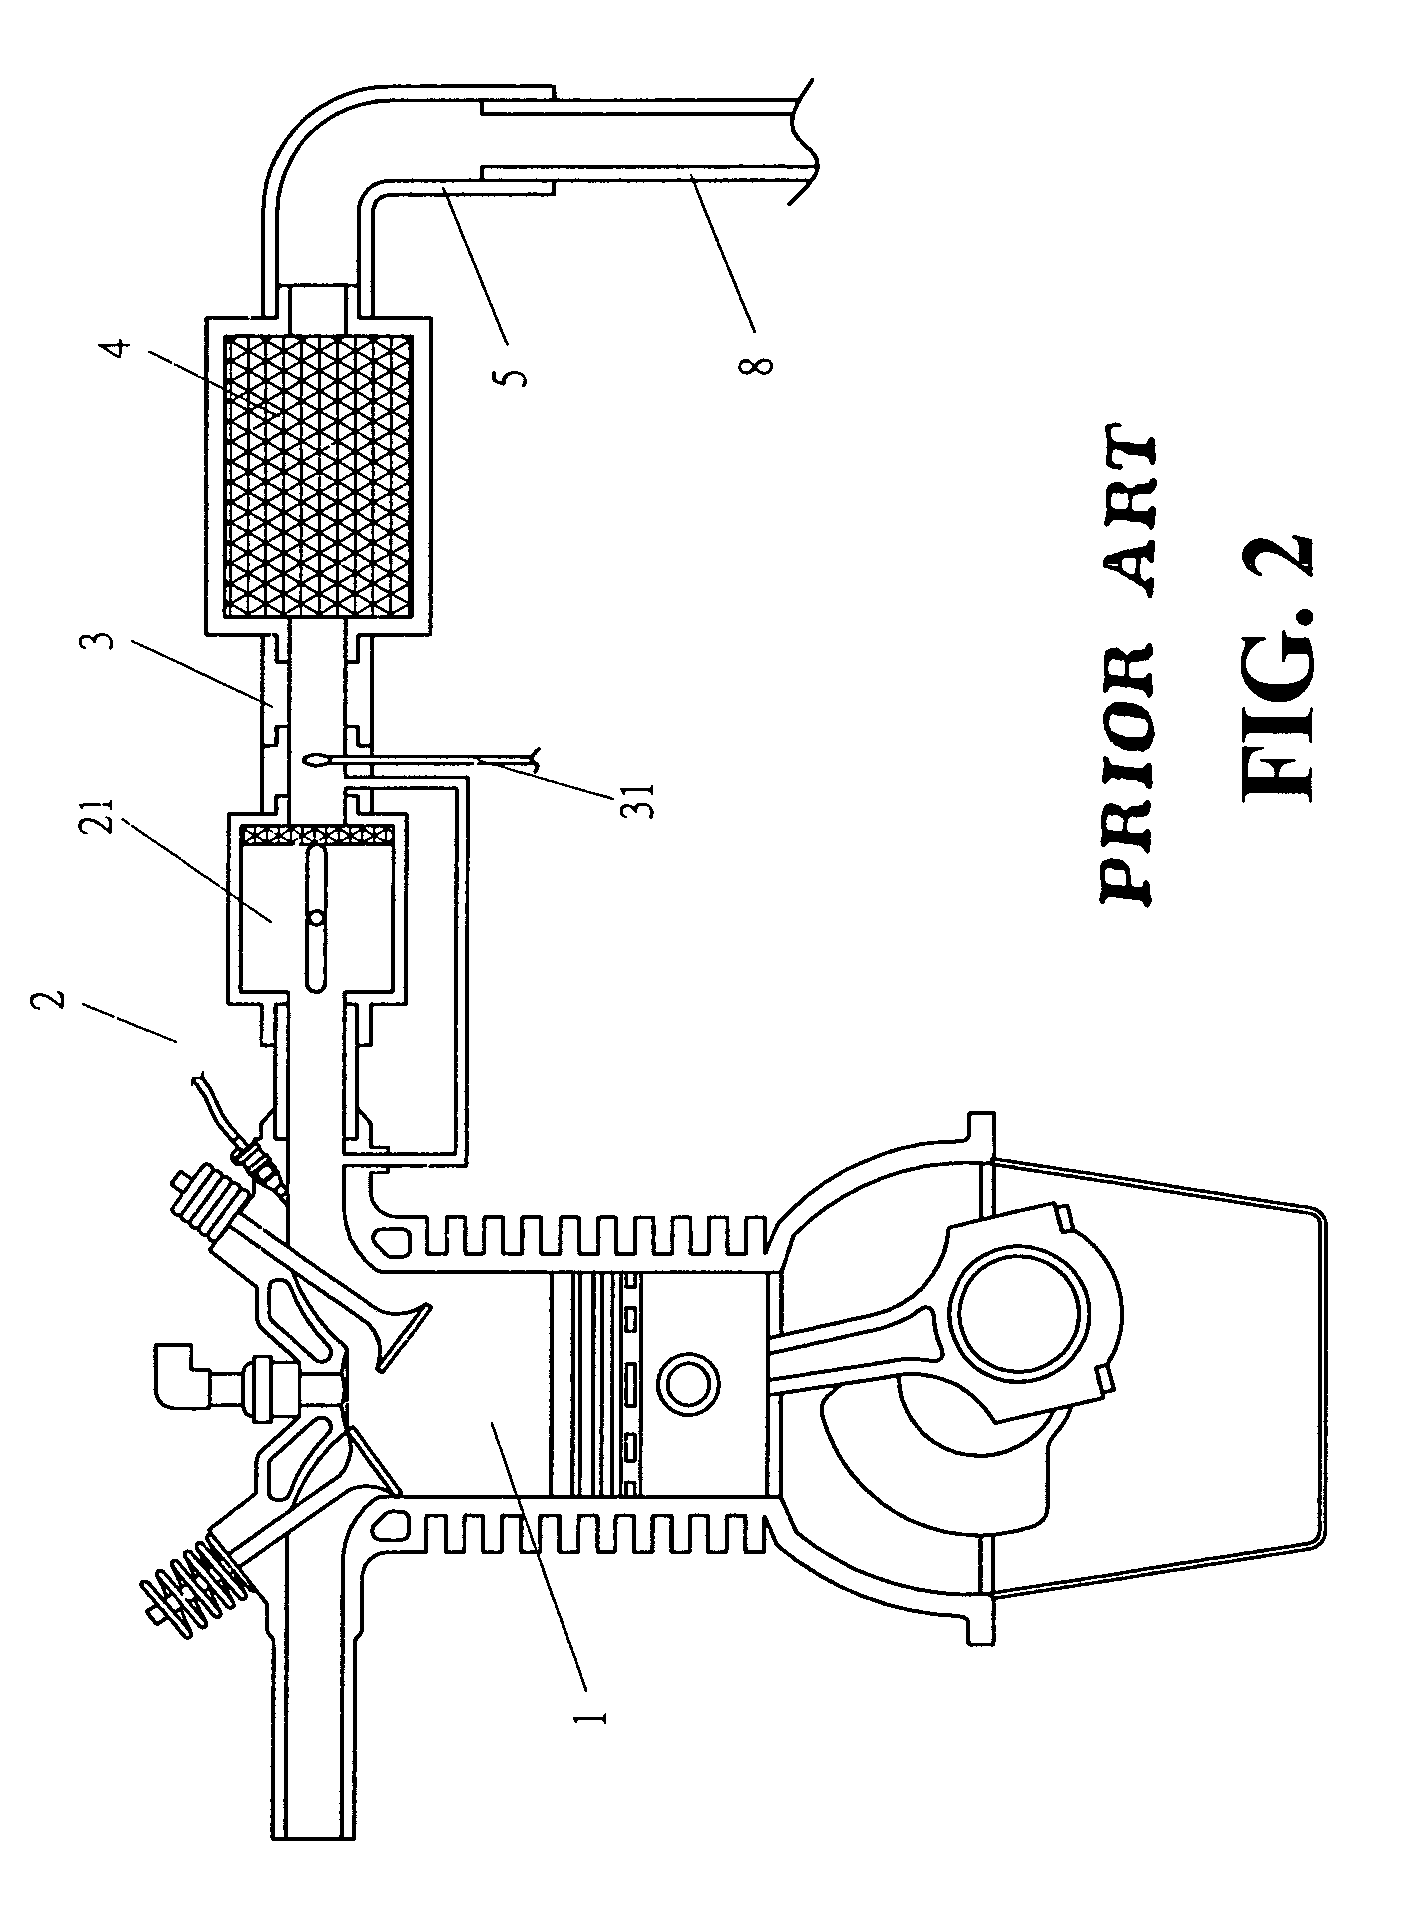 Apparatus and method for increasing the ratio of air to fuel of engine